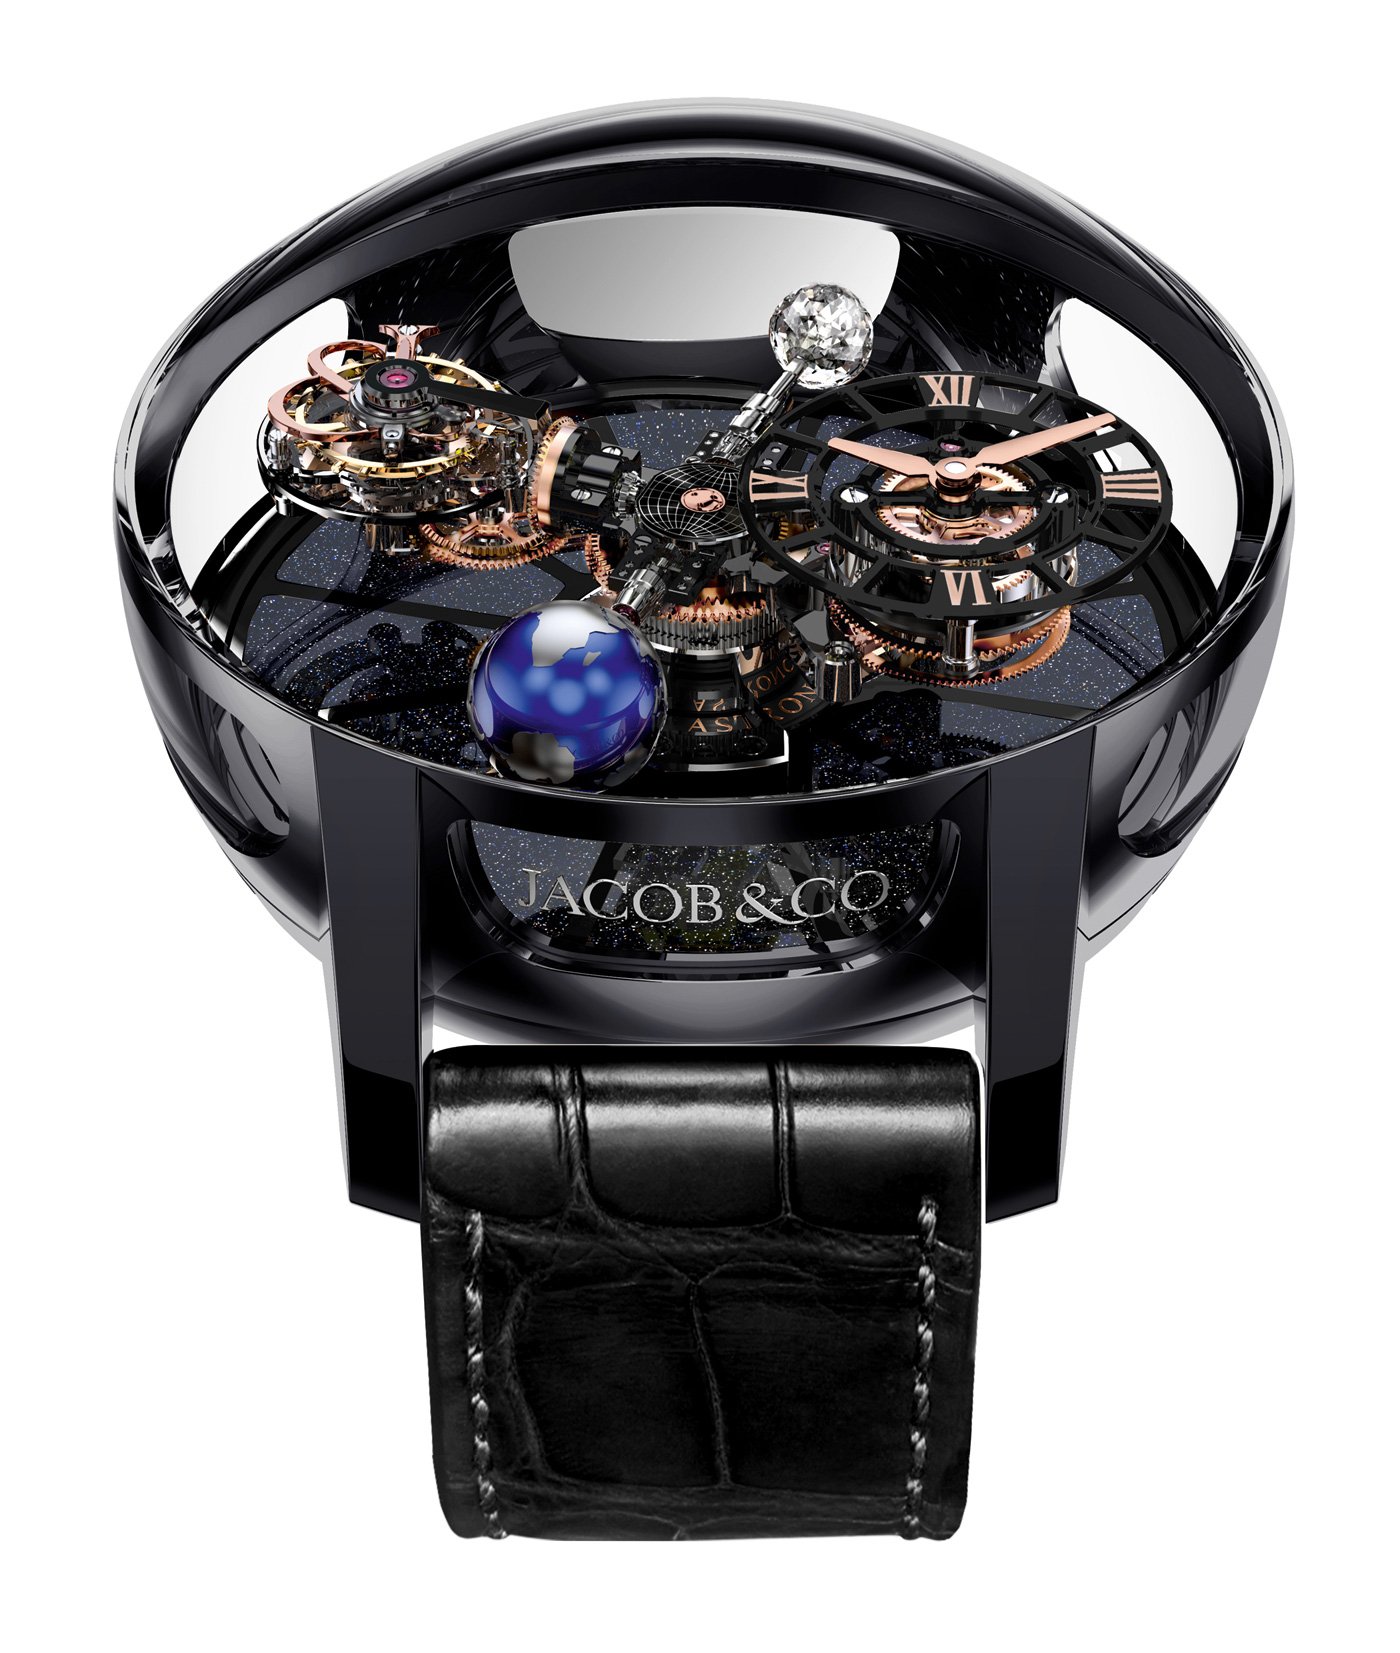 Jacob & Co. Releases The New Limited-Edition Astronomia Worldtime